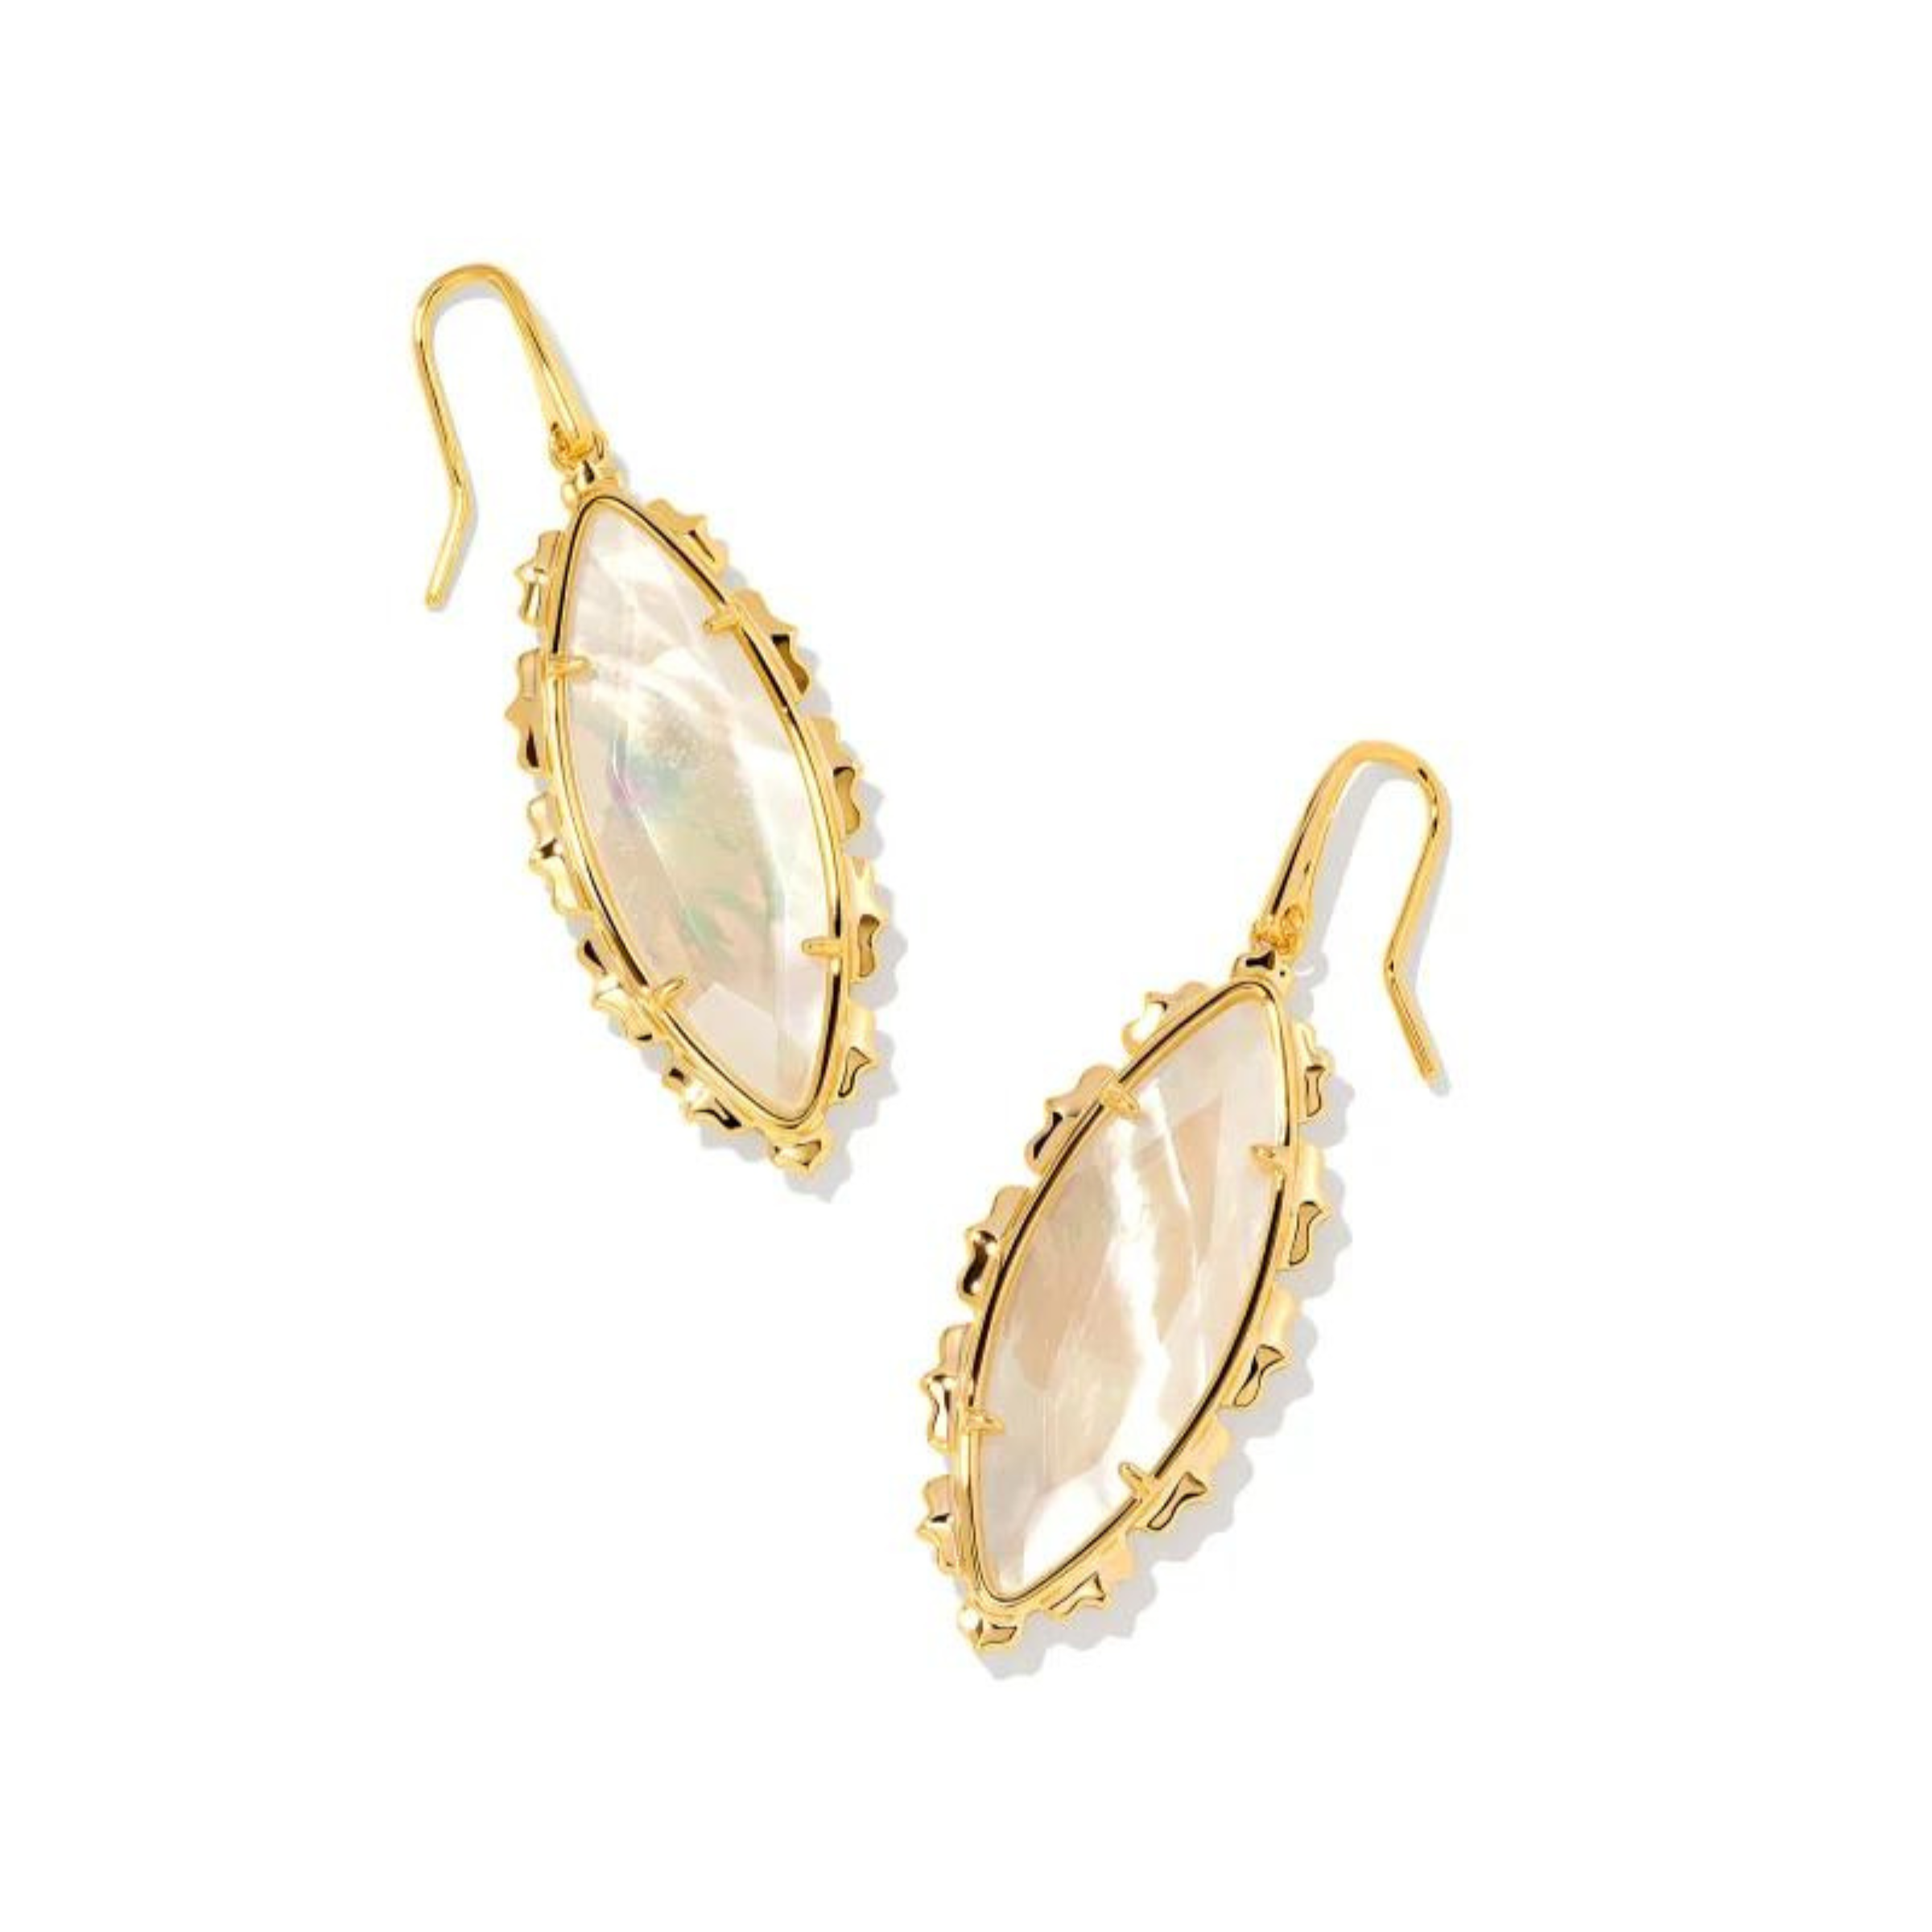 Kendra Scott | Genevieve Gold Drop Earrings in Ivory Mother of Pearl - Giddy Up Glamour Boutique